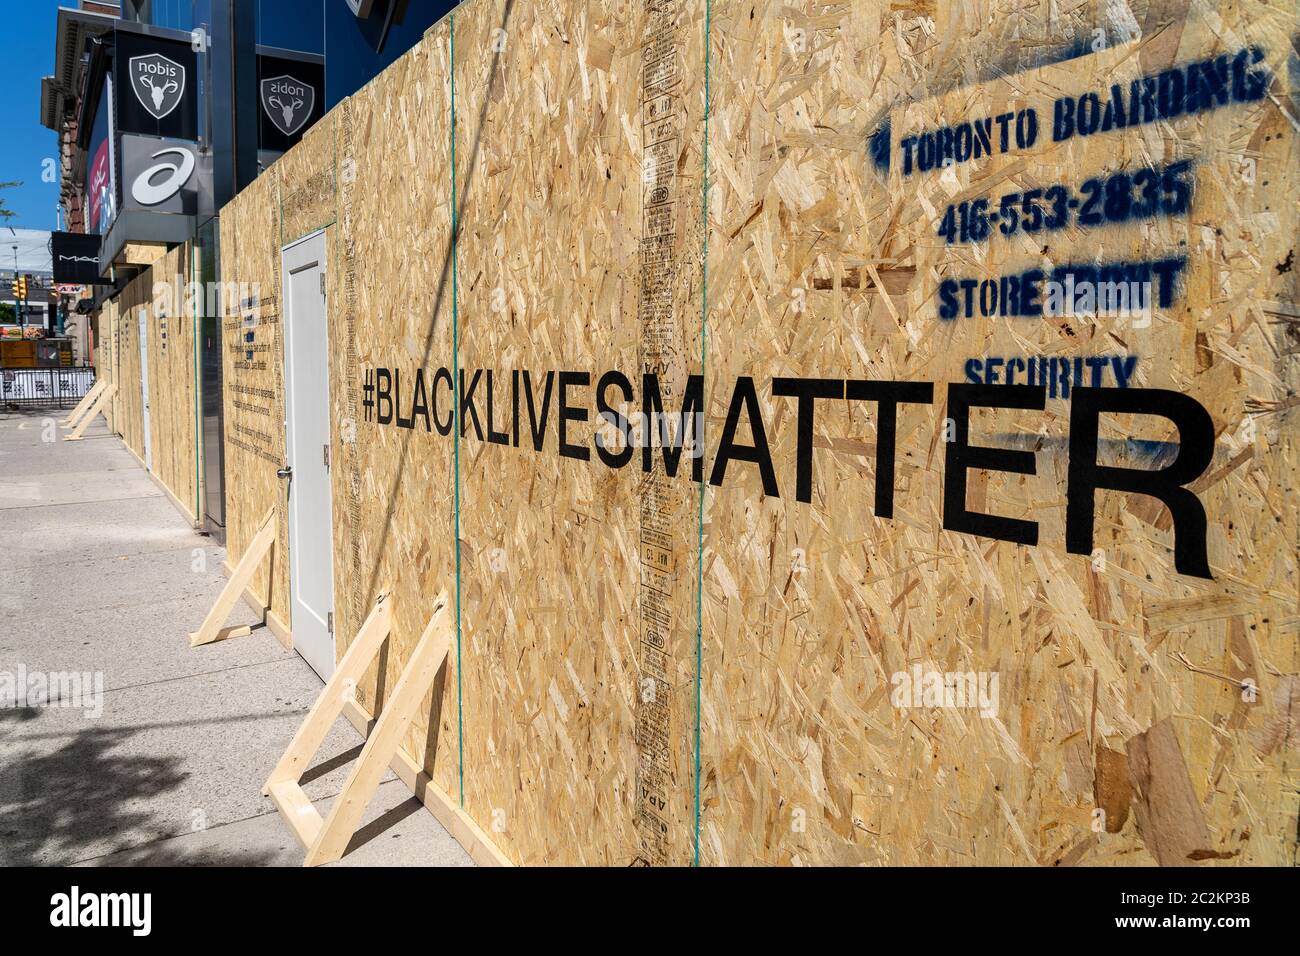 Boarded up storefront in Downtown Toronto showing Black Lives Matter message written out front in support of social movement against racial injustice. Stock Photo